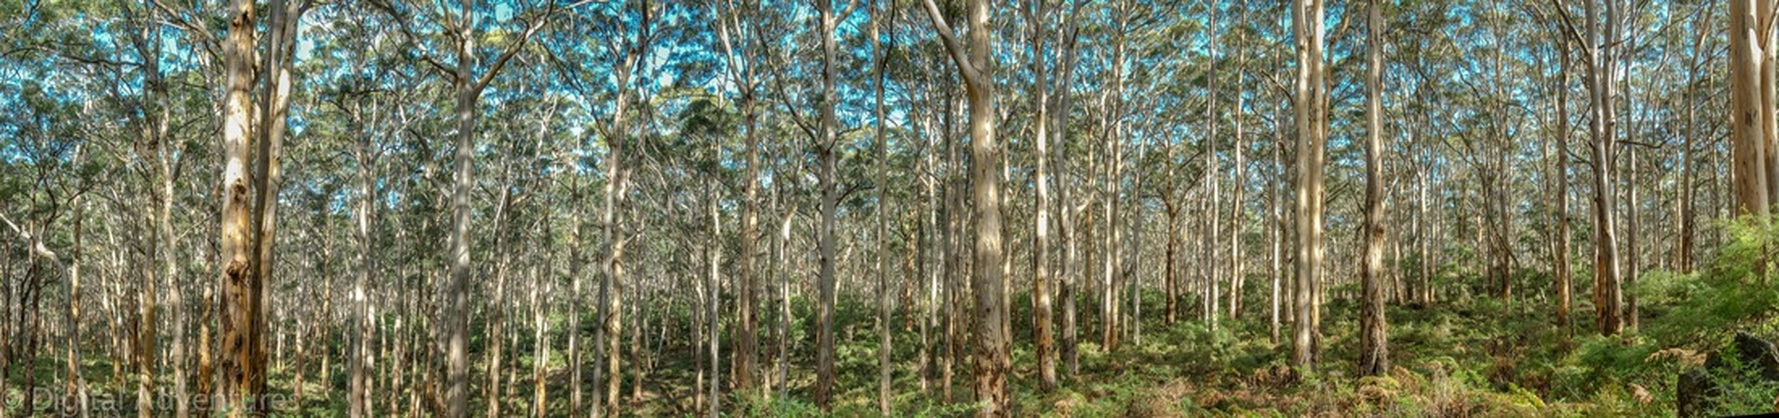 Eucalypt forest in the South Western corner of Australia